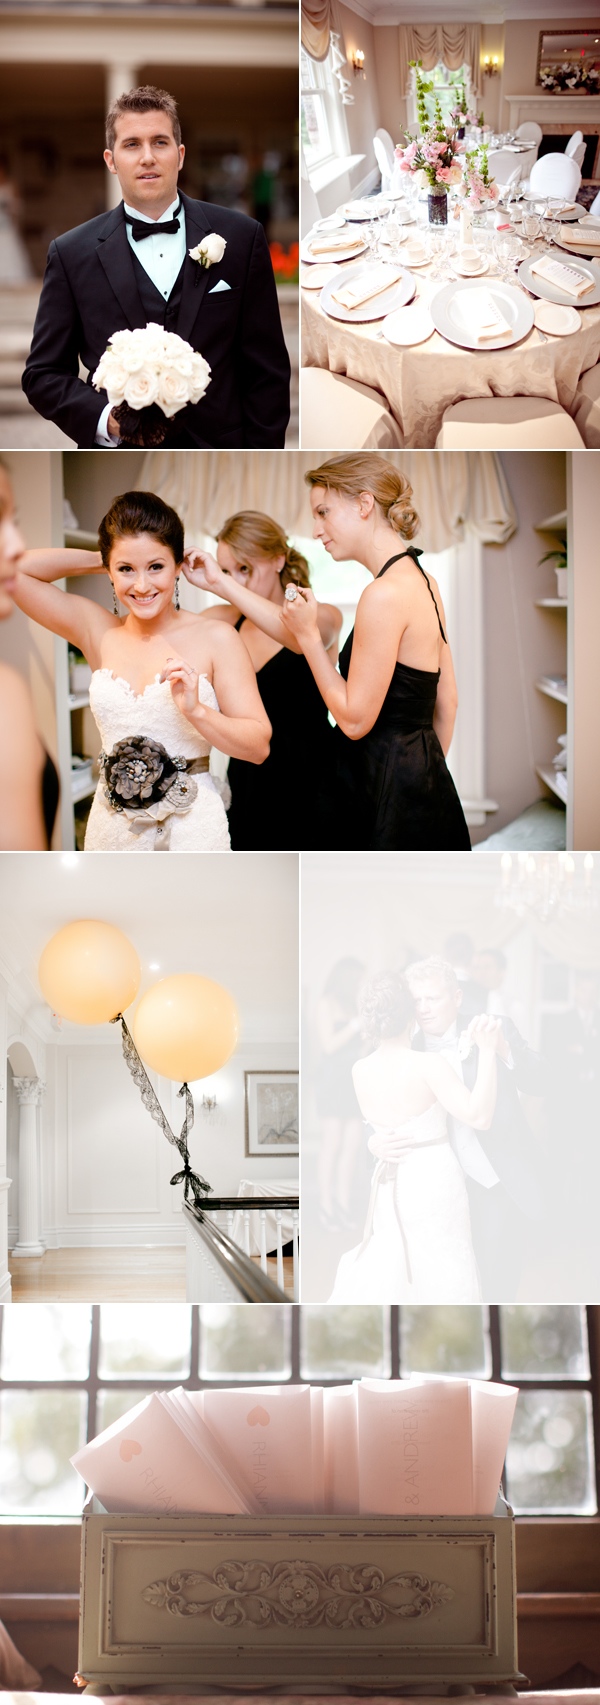 groom holding bouquet;  reception tables; bridesmaids helping bride get ready; balloons on banister of Mansion; personalized cards